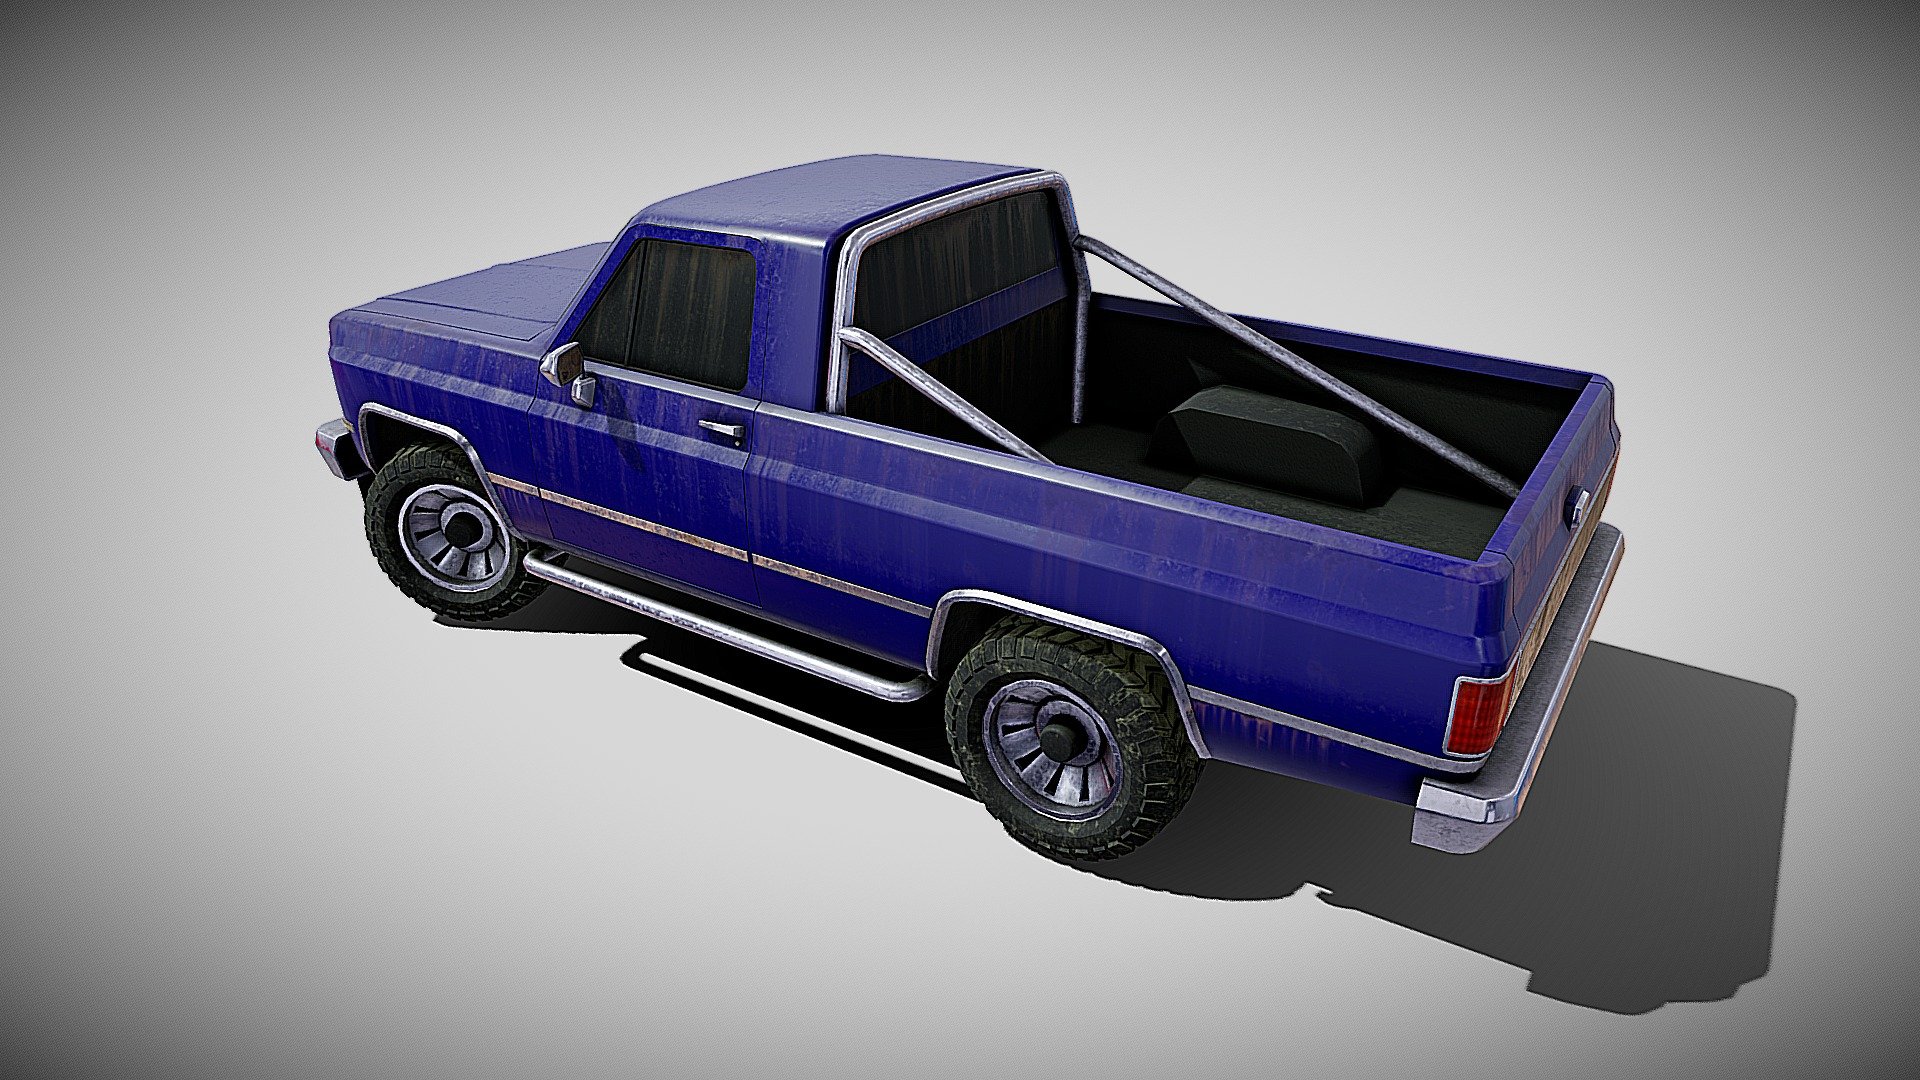 Game ready pickup. Best for background scene and mobile projects. Interior not included. Separate parts : wheels, rear hood, car body. Model scale Unity engine 3d model